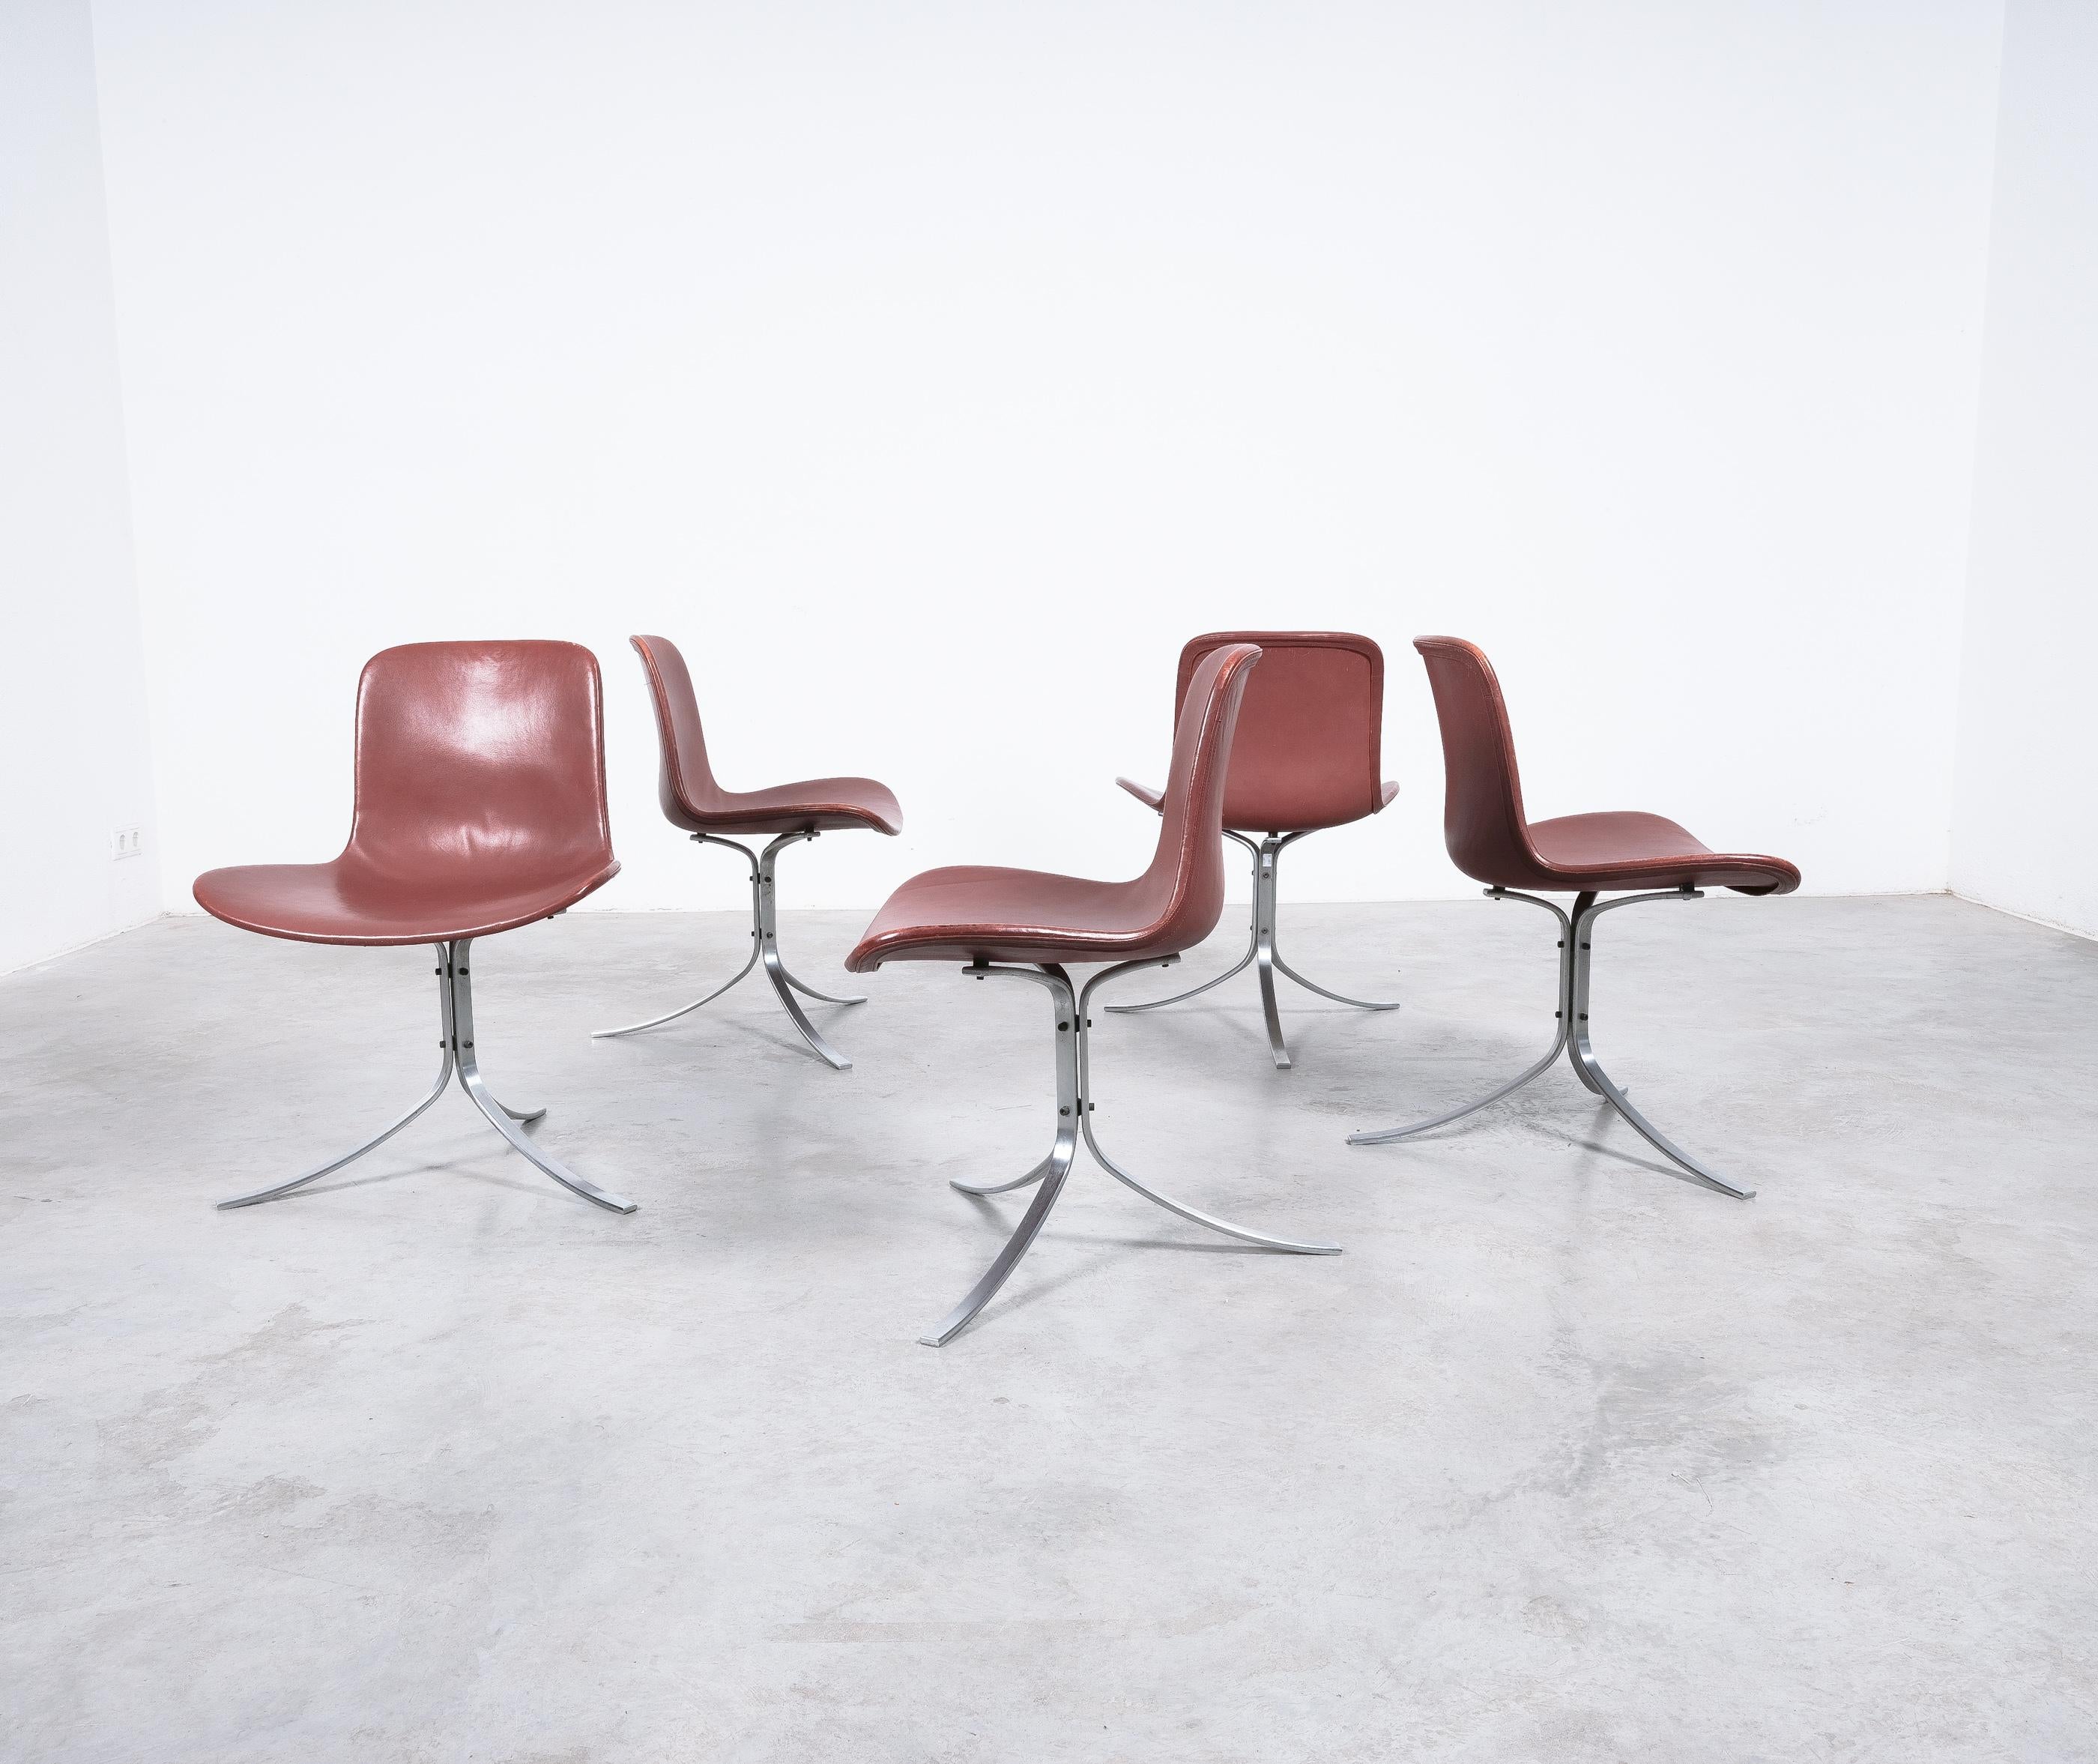 Poul Kjærholm PK-9 Dining Chairs by E. Kold Christensen Brown Leather, Denmark In Good Condition For Sale In Vienna, AT